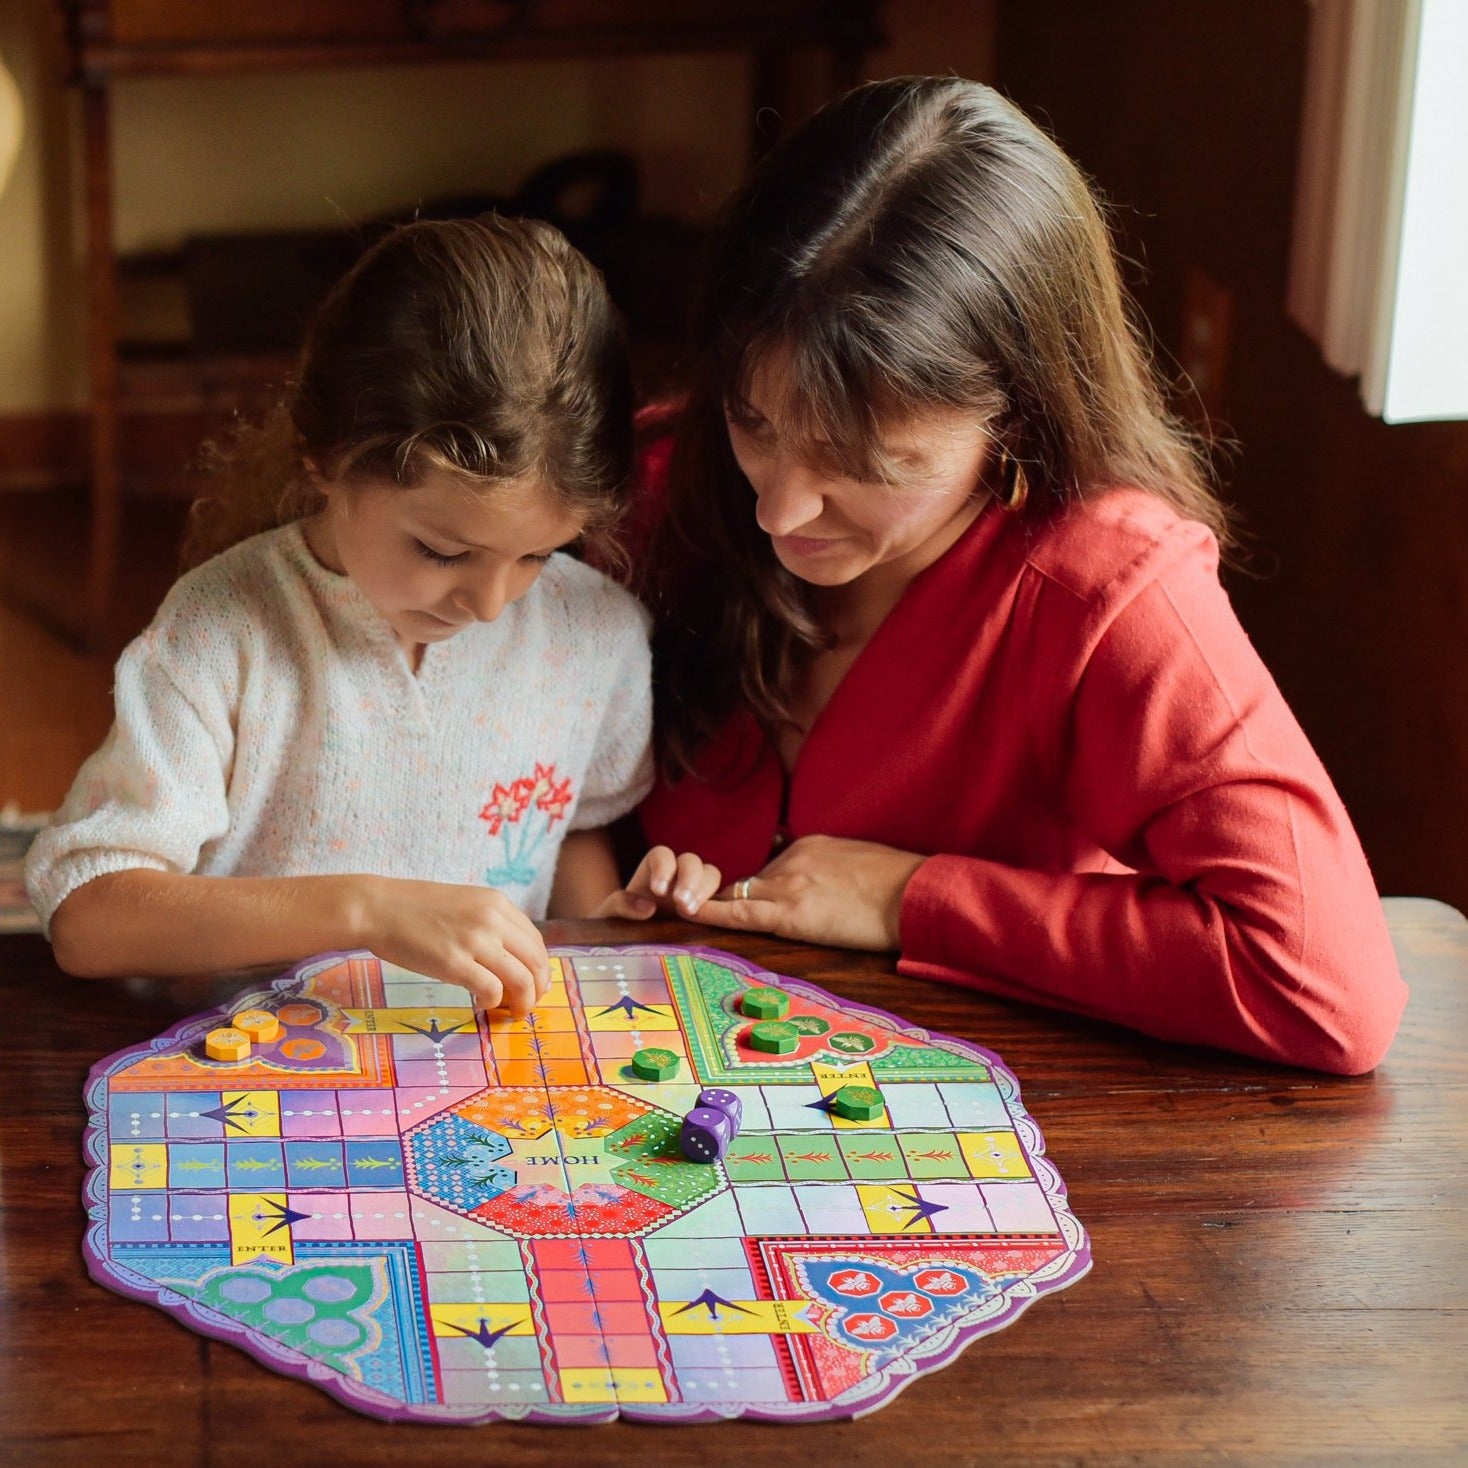 New Traditional Ludo Board Game Kid Children Adult Family Fun Play